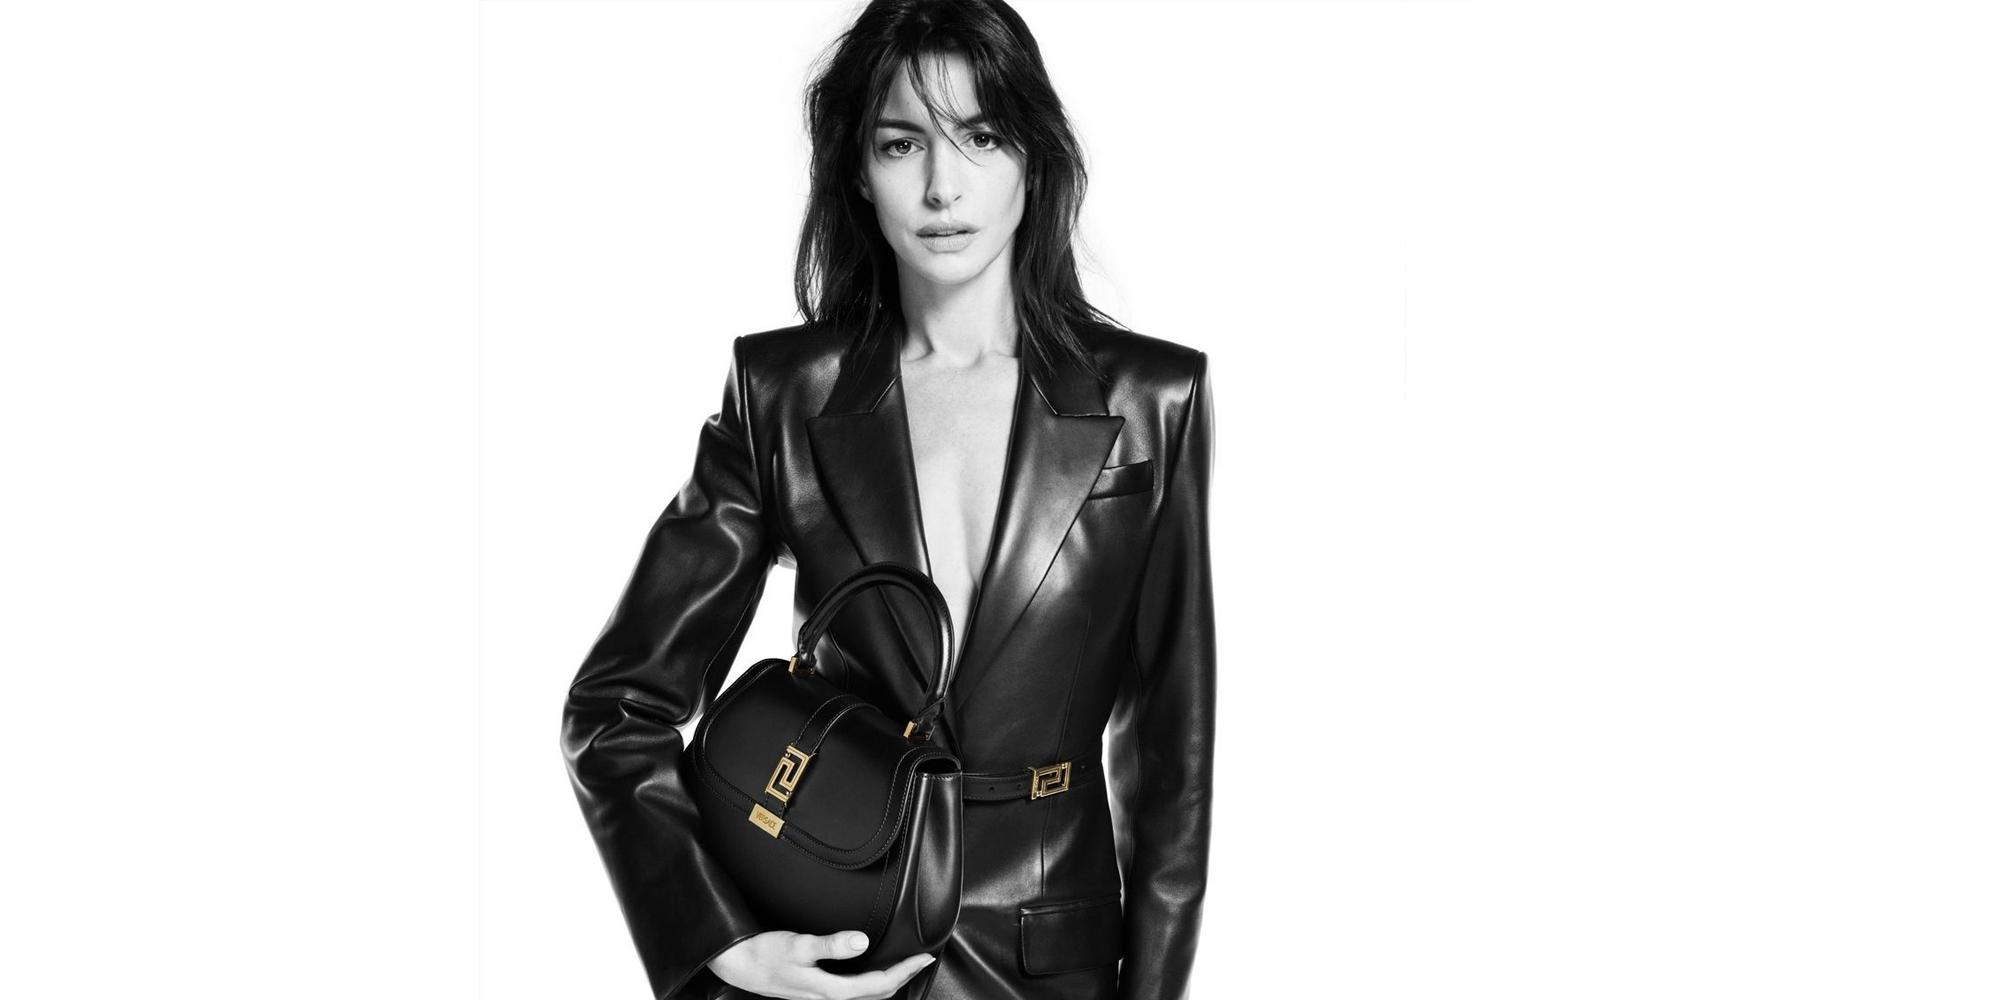 VERSACE ICONS FALL 2023 AD CAMPAIGN FEATURING ANNE HATHAWAY